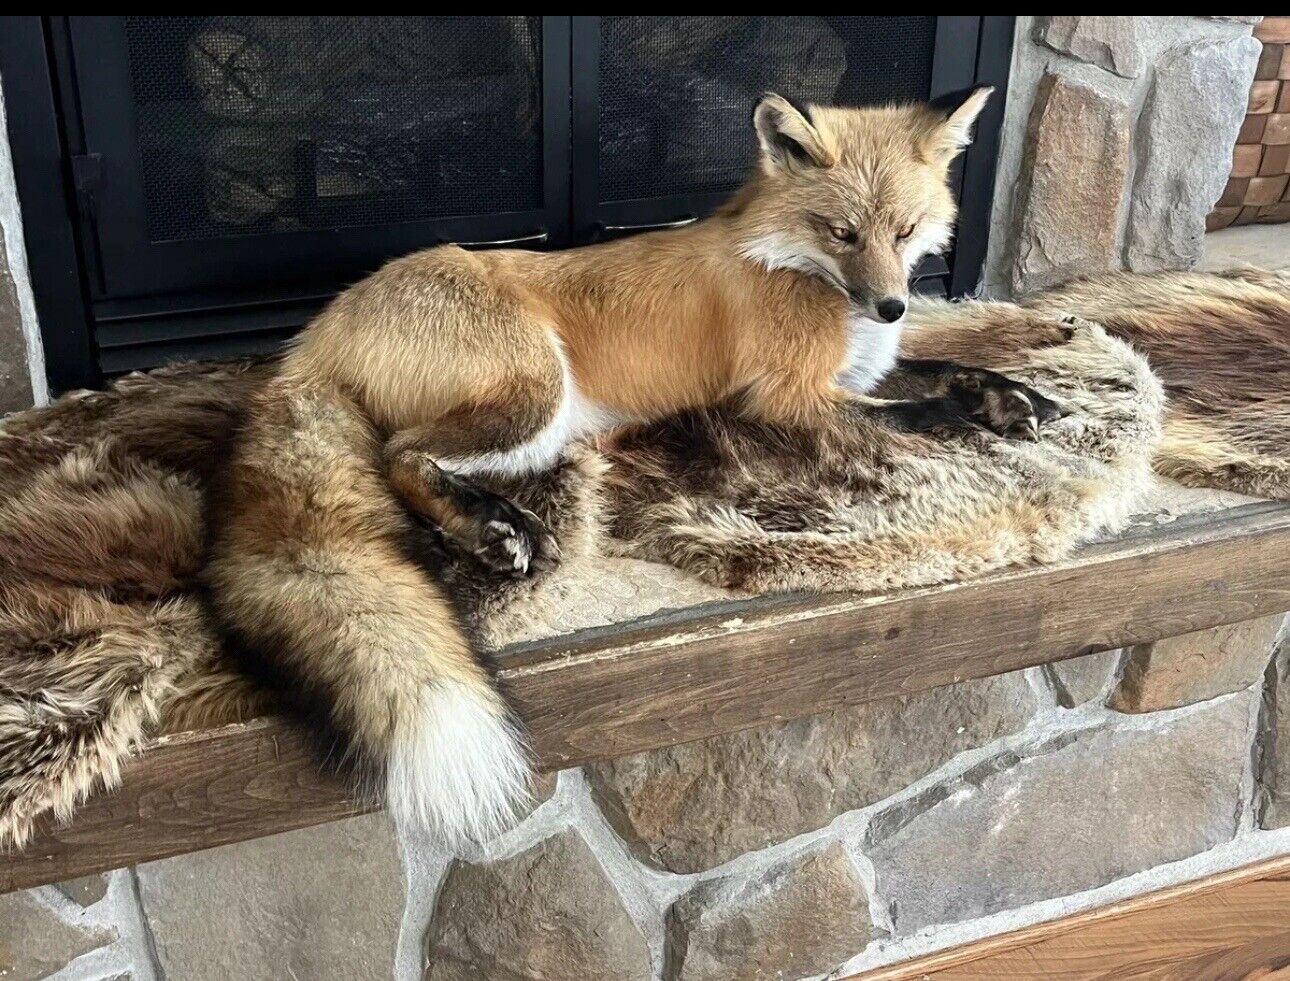 Red Fox Taxidermy Full Body Mount Cabin Camp Man Cave Home Office Den Decor NEW!